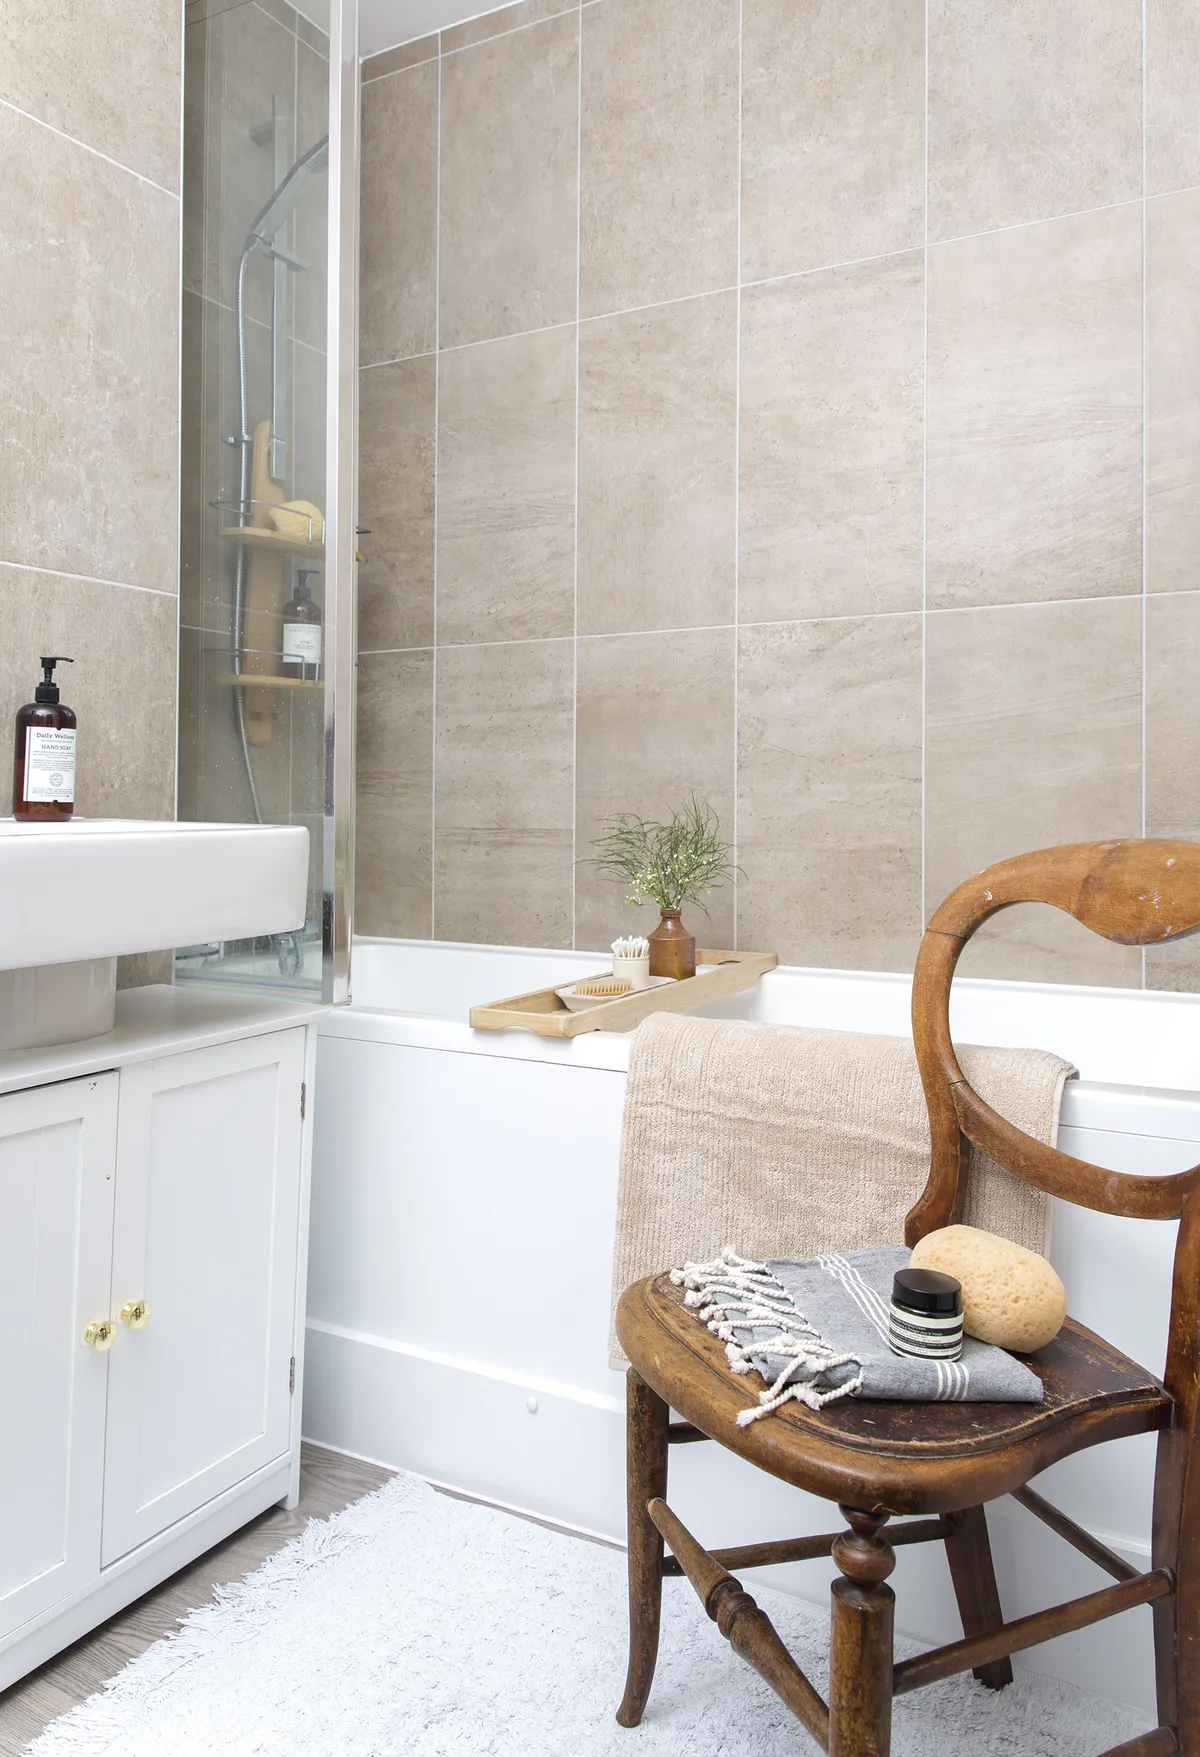 Rectangular-shaped beige tiles line the bathroom walls, with standard white fittings that were all part of the new-build décor. Tilly added the small cabinet from B&M under the sink to store cleaning products